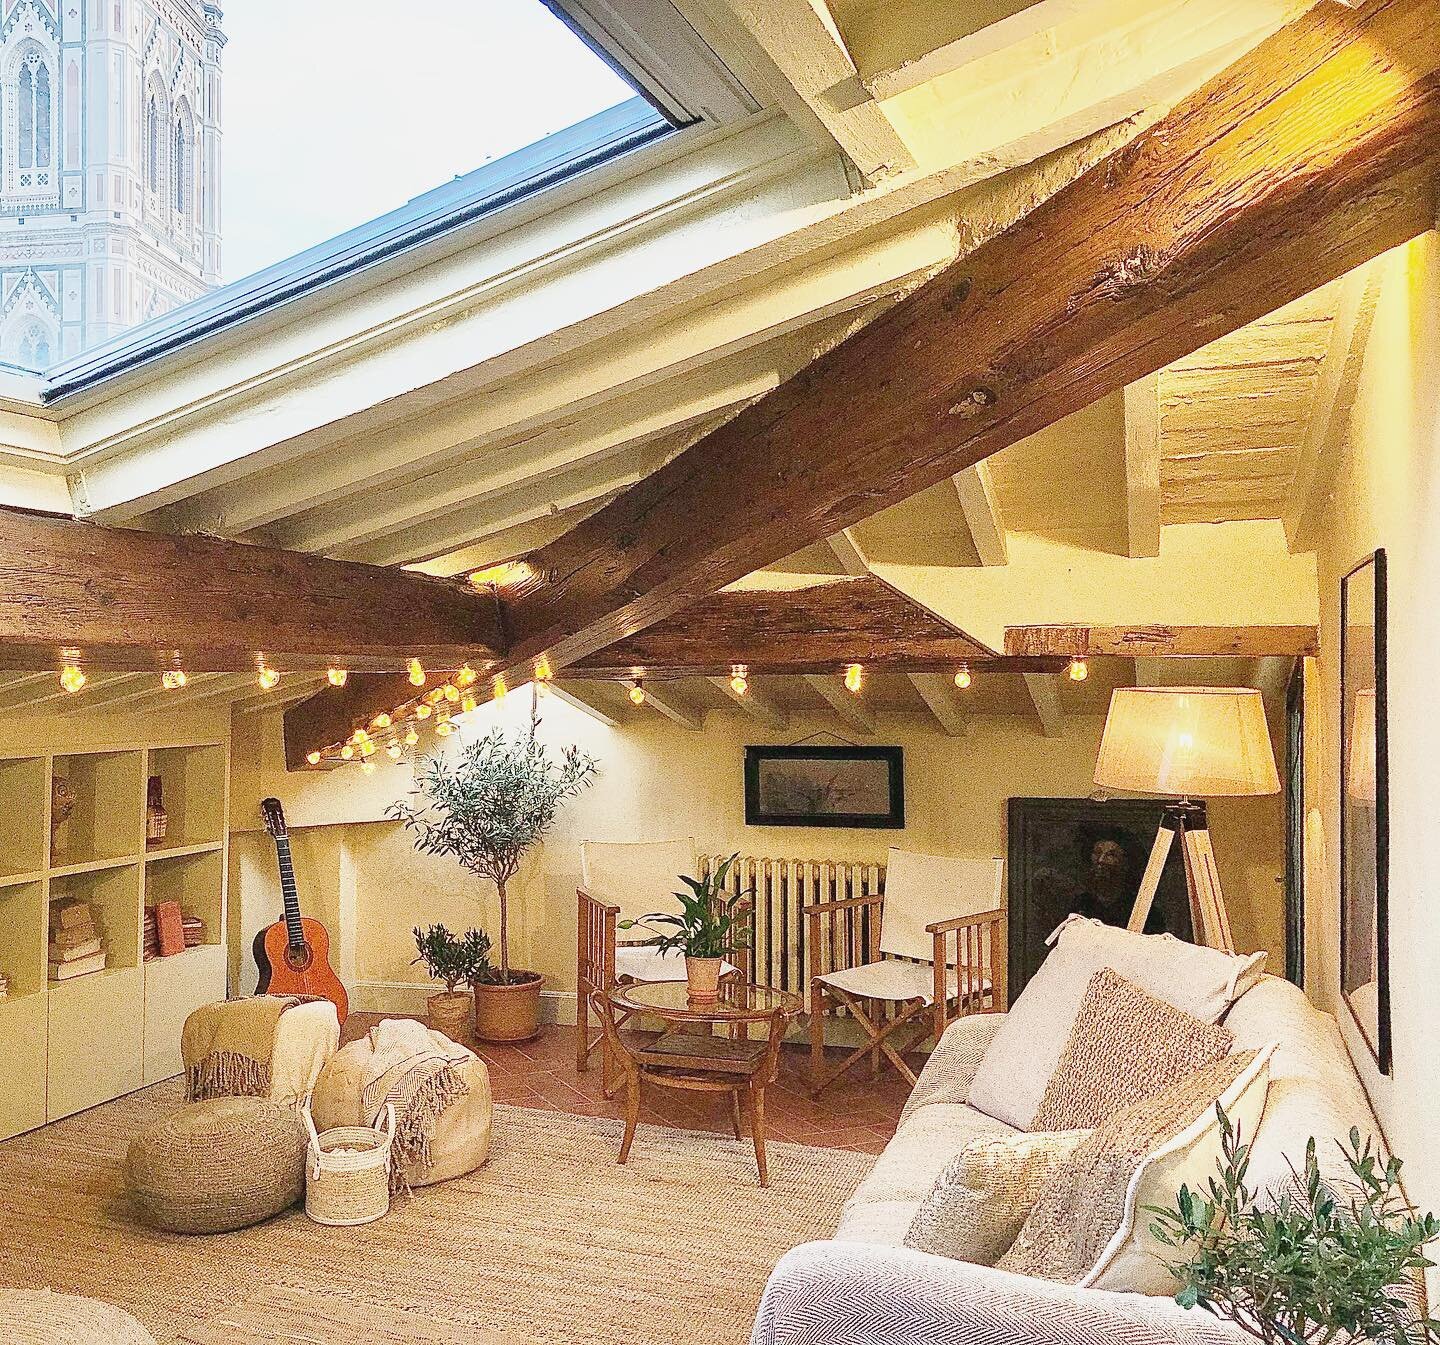 The snuggle corner! Living room with sloped ceilings, 400-year-old wooden beams, and skylight windows with Duomo view.